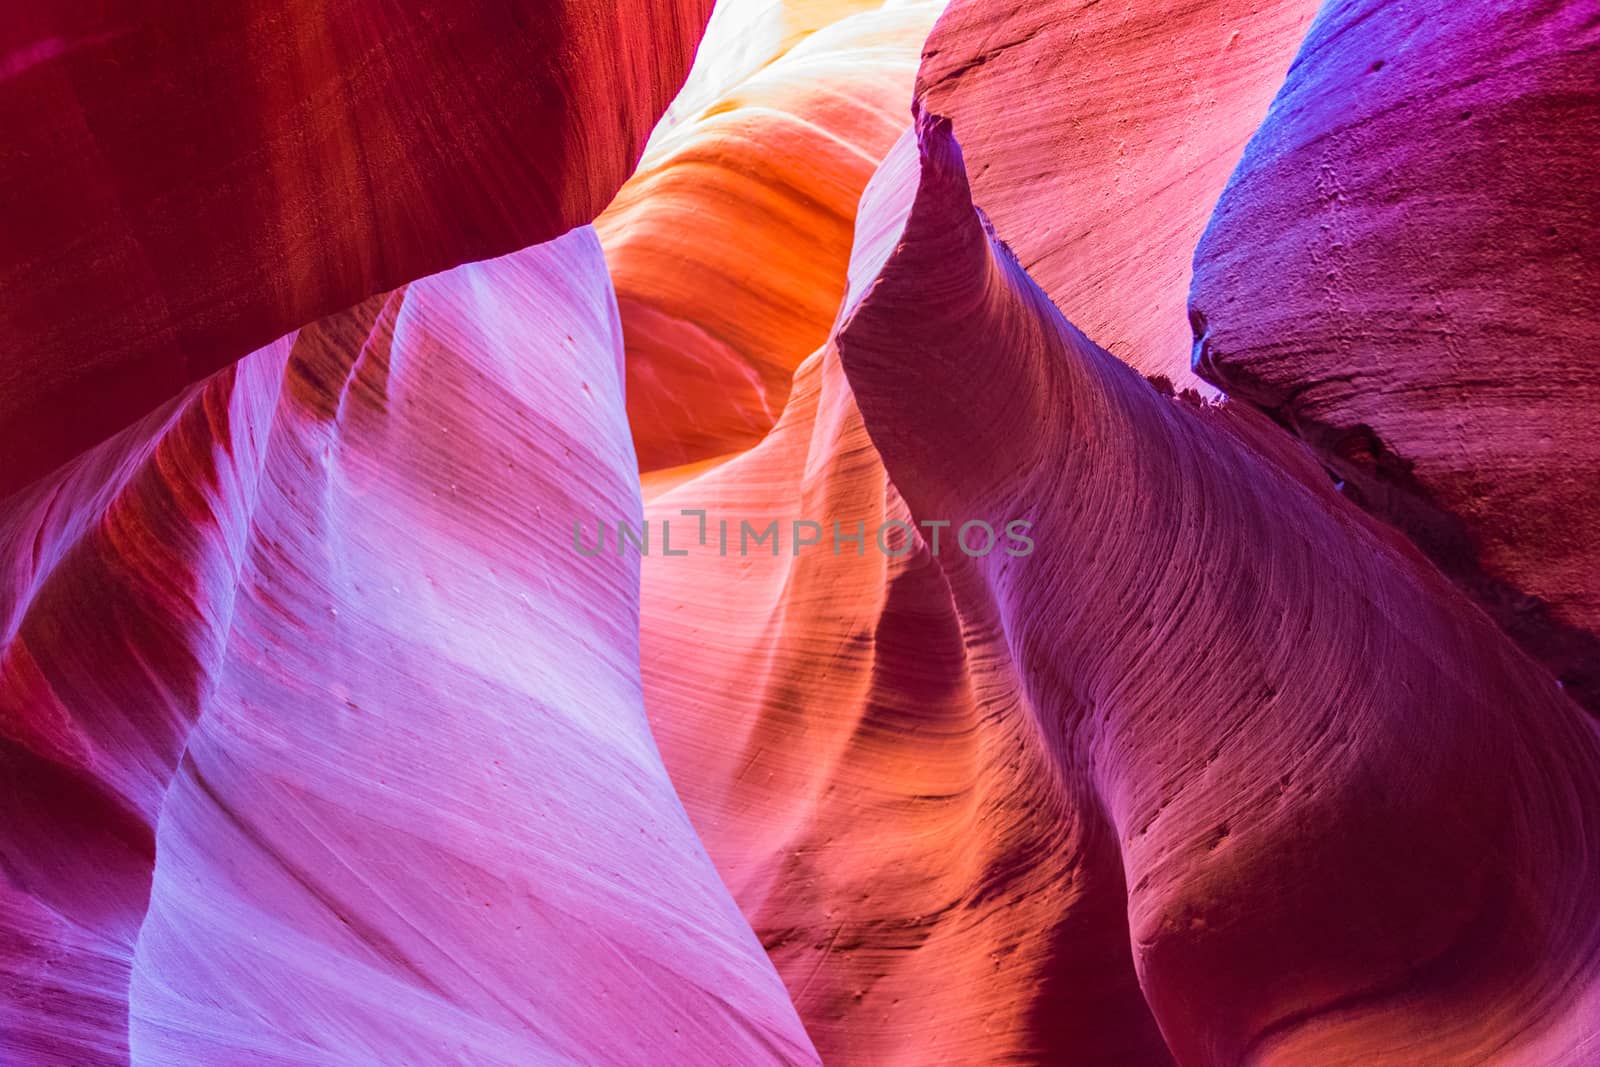 Antelope Canyon in the Navajo Reservation near Page, Arizona, USA by nicousnake